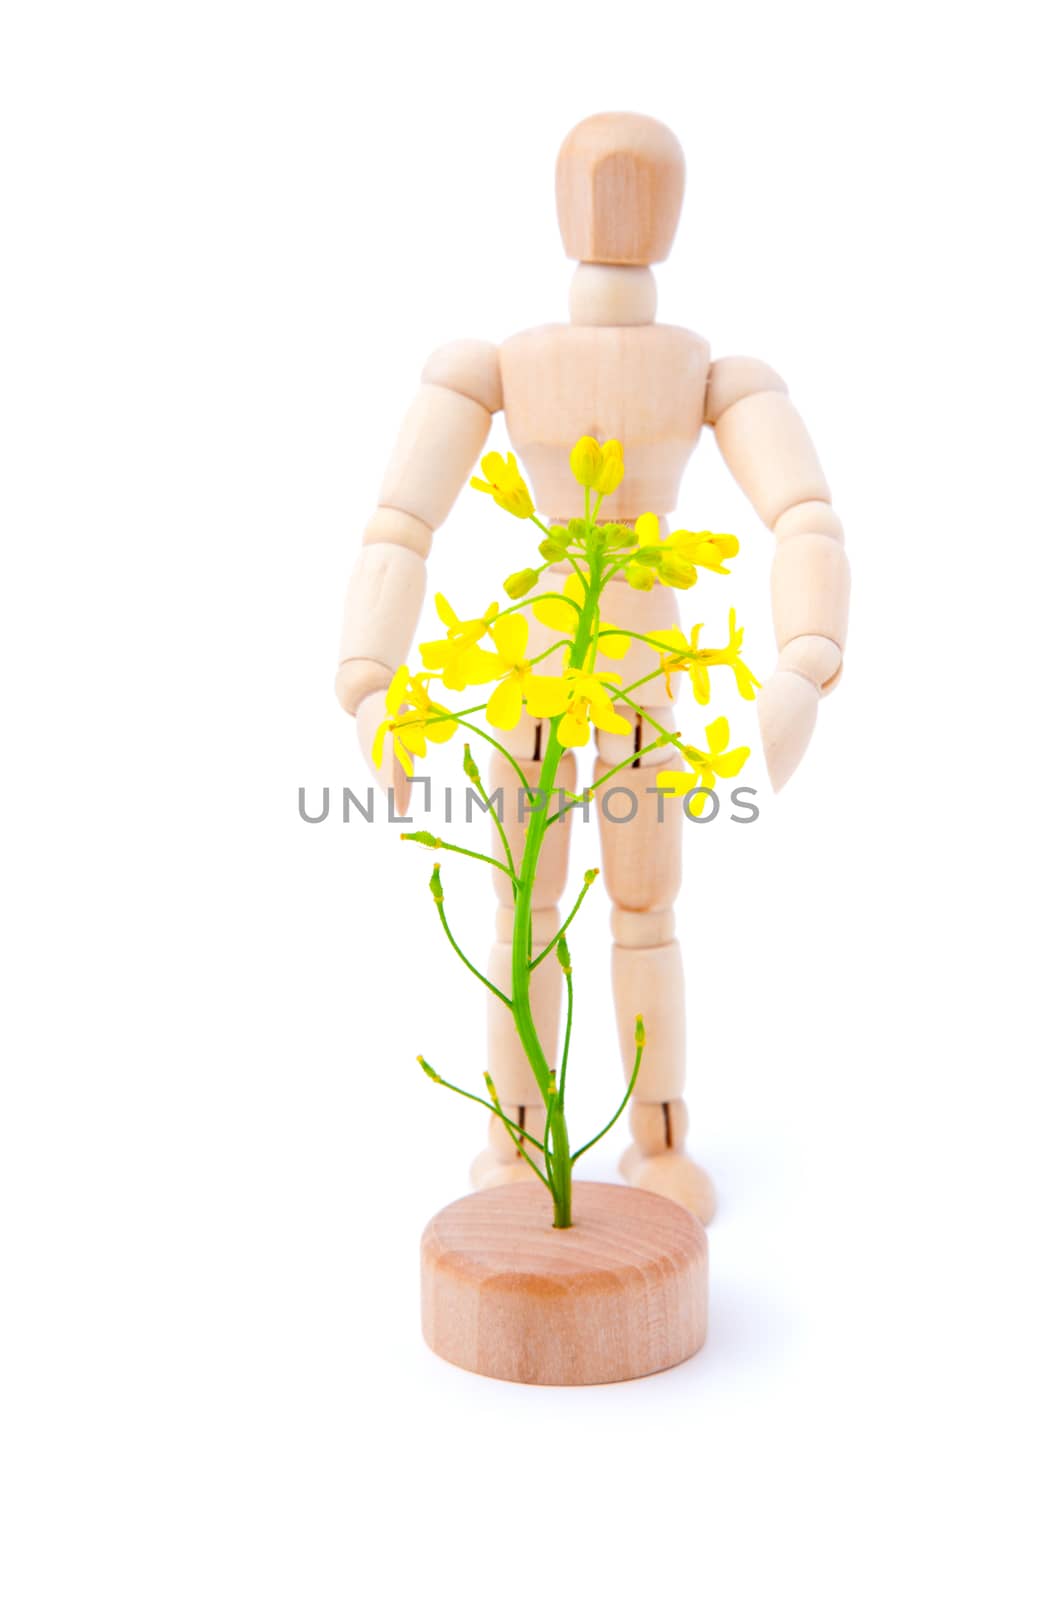 Rape blossoms with a wooden man, isolated on white background by motorolka